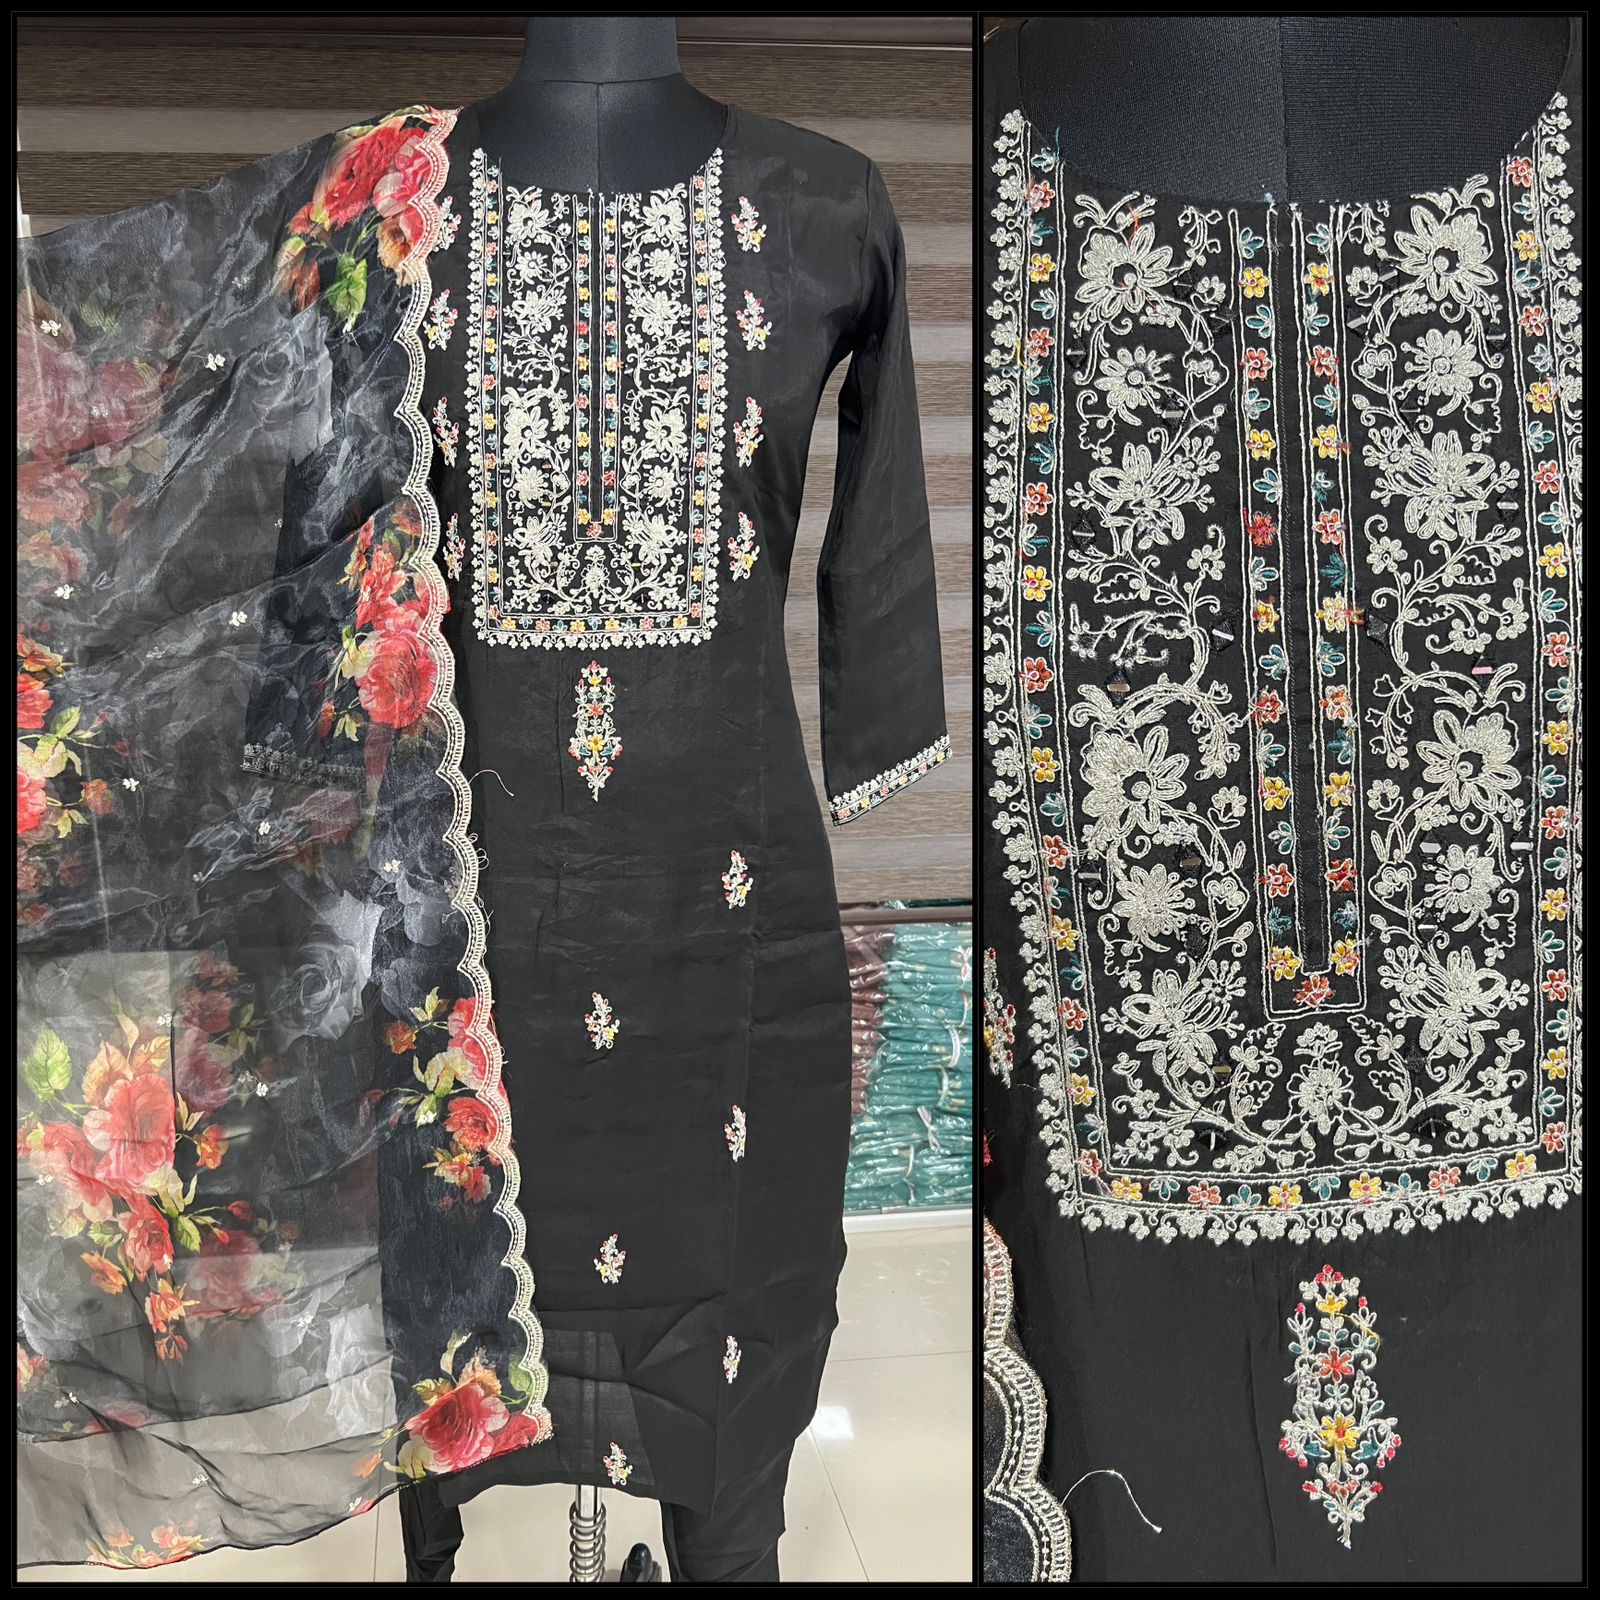 four rose pick and choose viscose D NO 2039 2040 2041 2042 elegant look top bottom with dupatta pick and choose